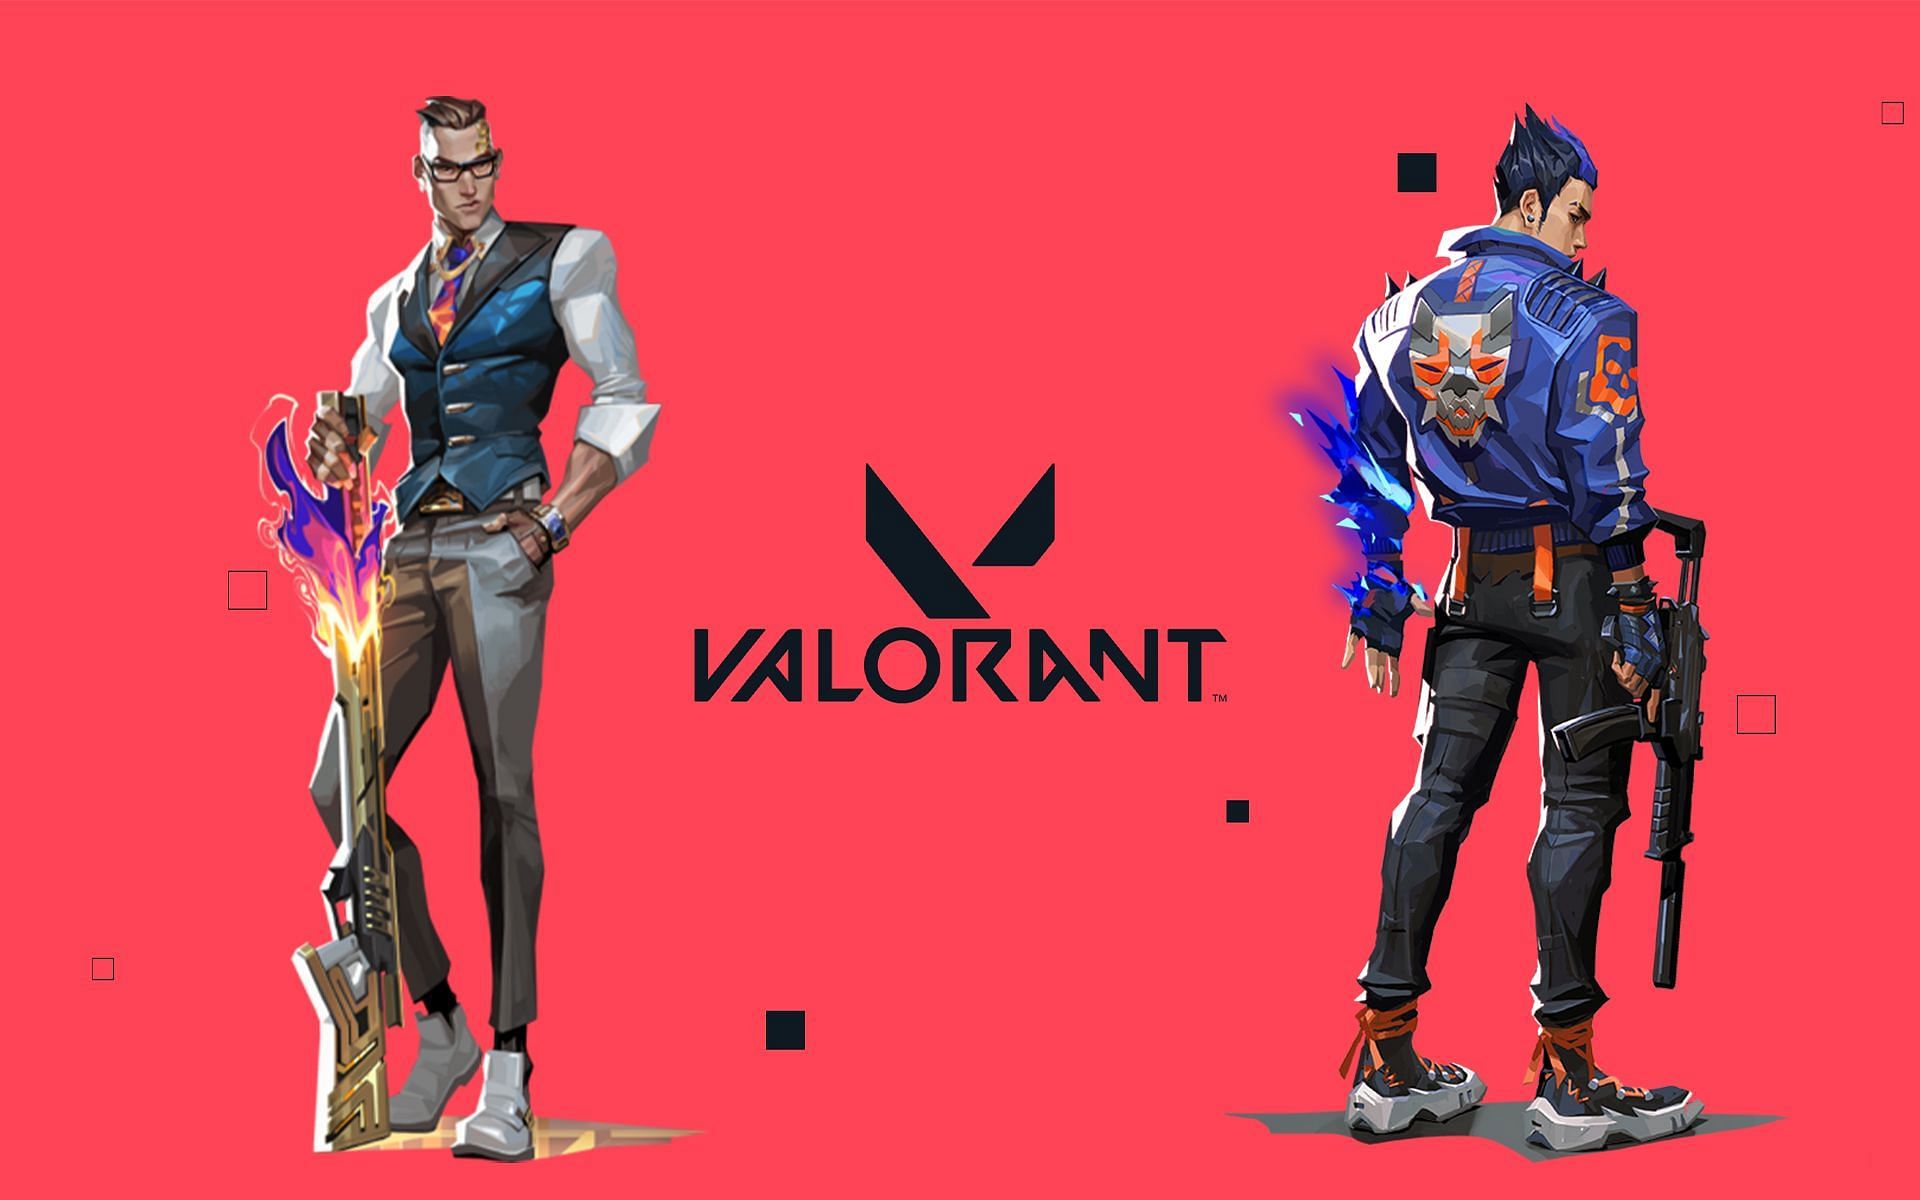 Who is better in Valorant? Yoru or Chamber? (Image by Sportskeeda)